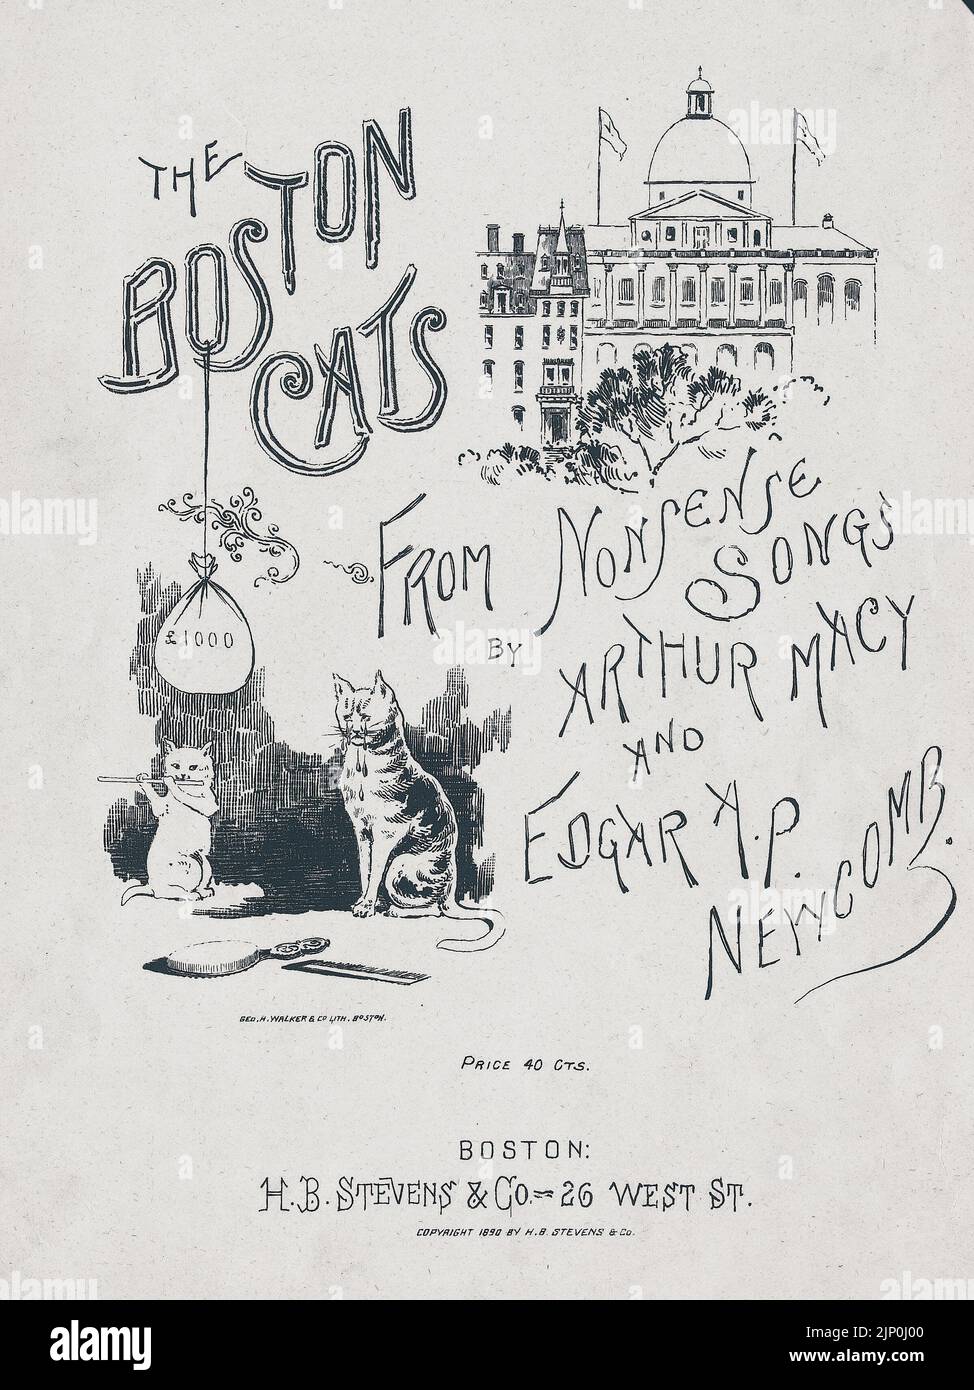 The Boston Cats, Composed by Edgar Allan Poe Newcomb, Lyrics by Arthur Macy, Published by H. B. Stevens (1890) Sheet music cover Stock Photo